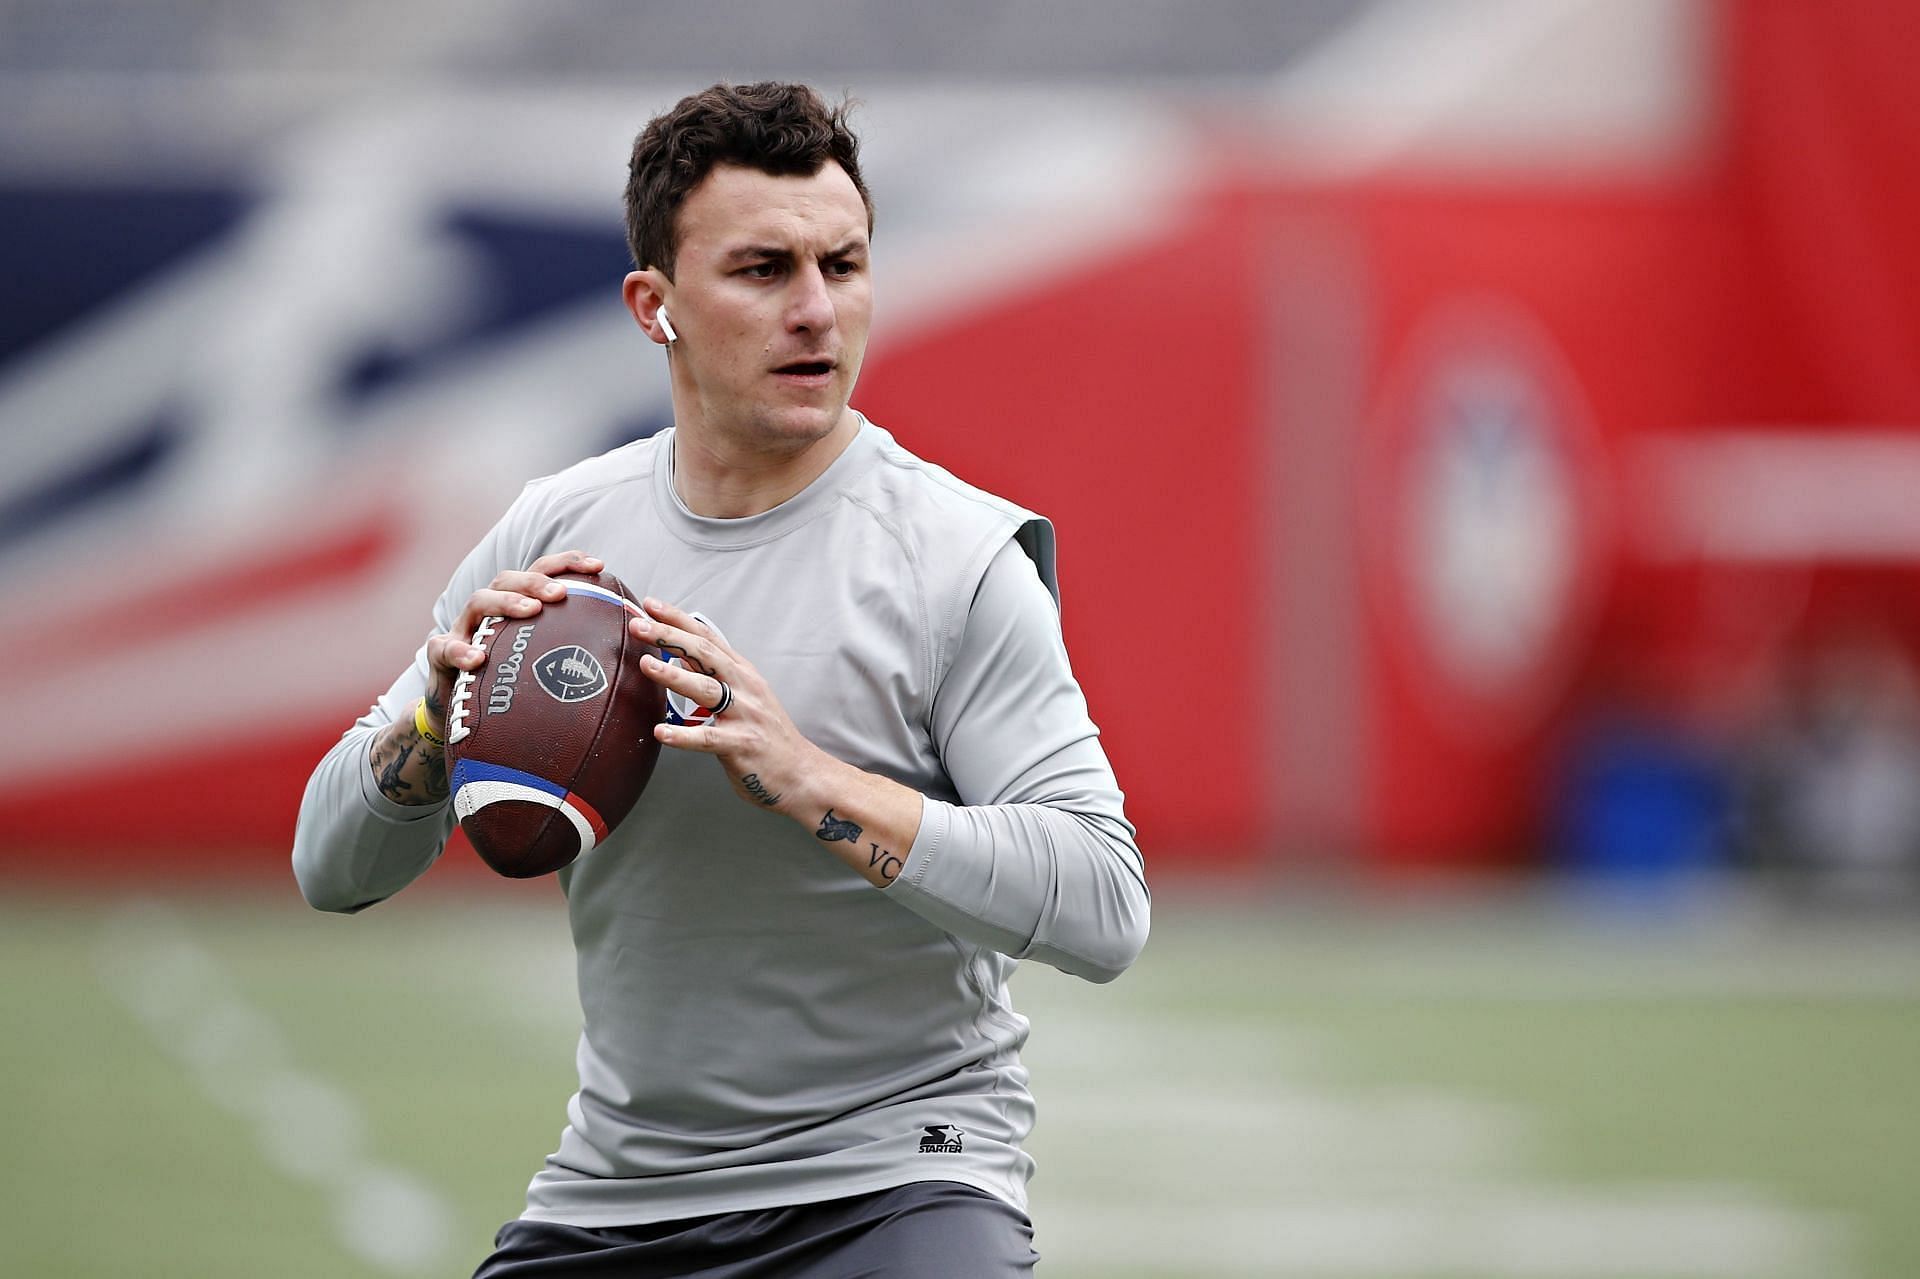 Johnny Manziel during football practice